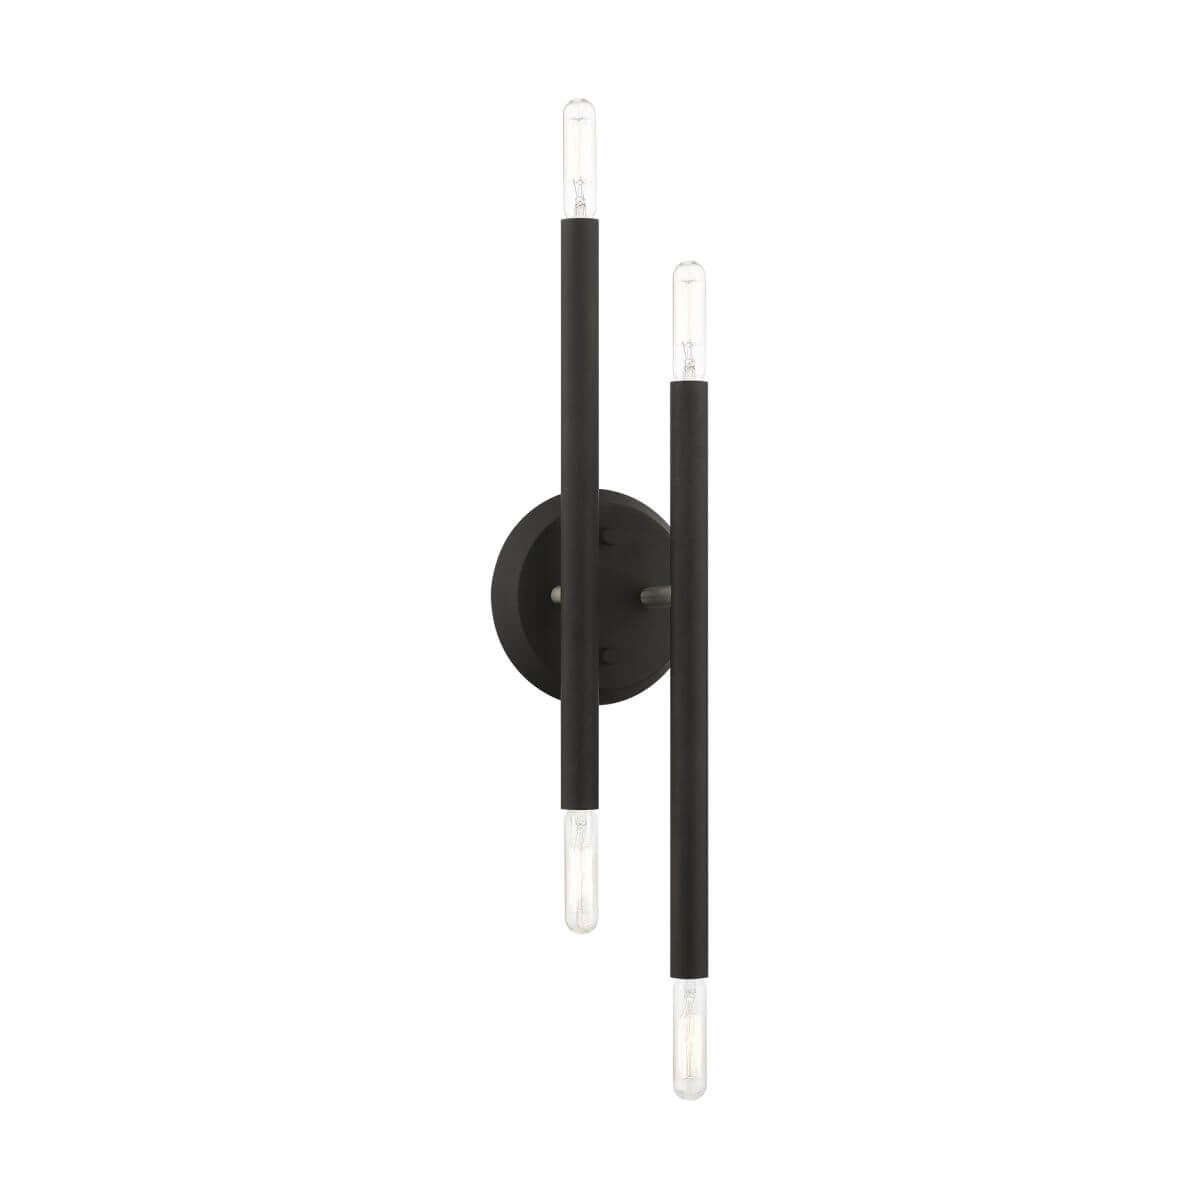 4 Light 17 inch Tall Wall Sconce in Black-Brushed Nickel Accents - 245301